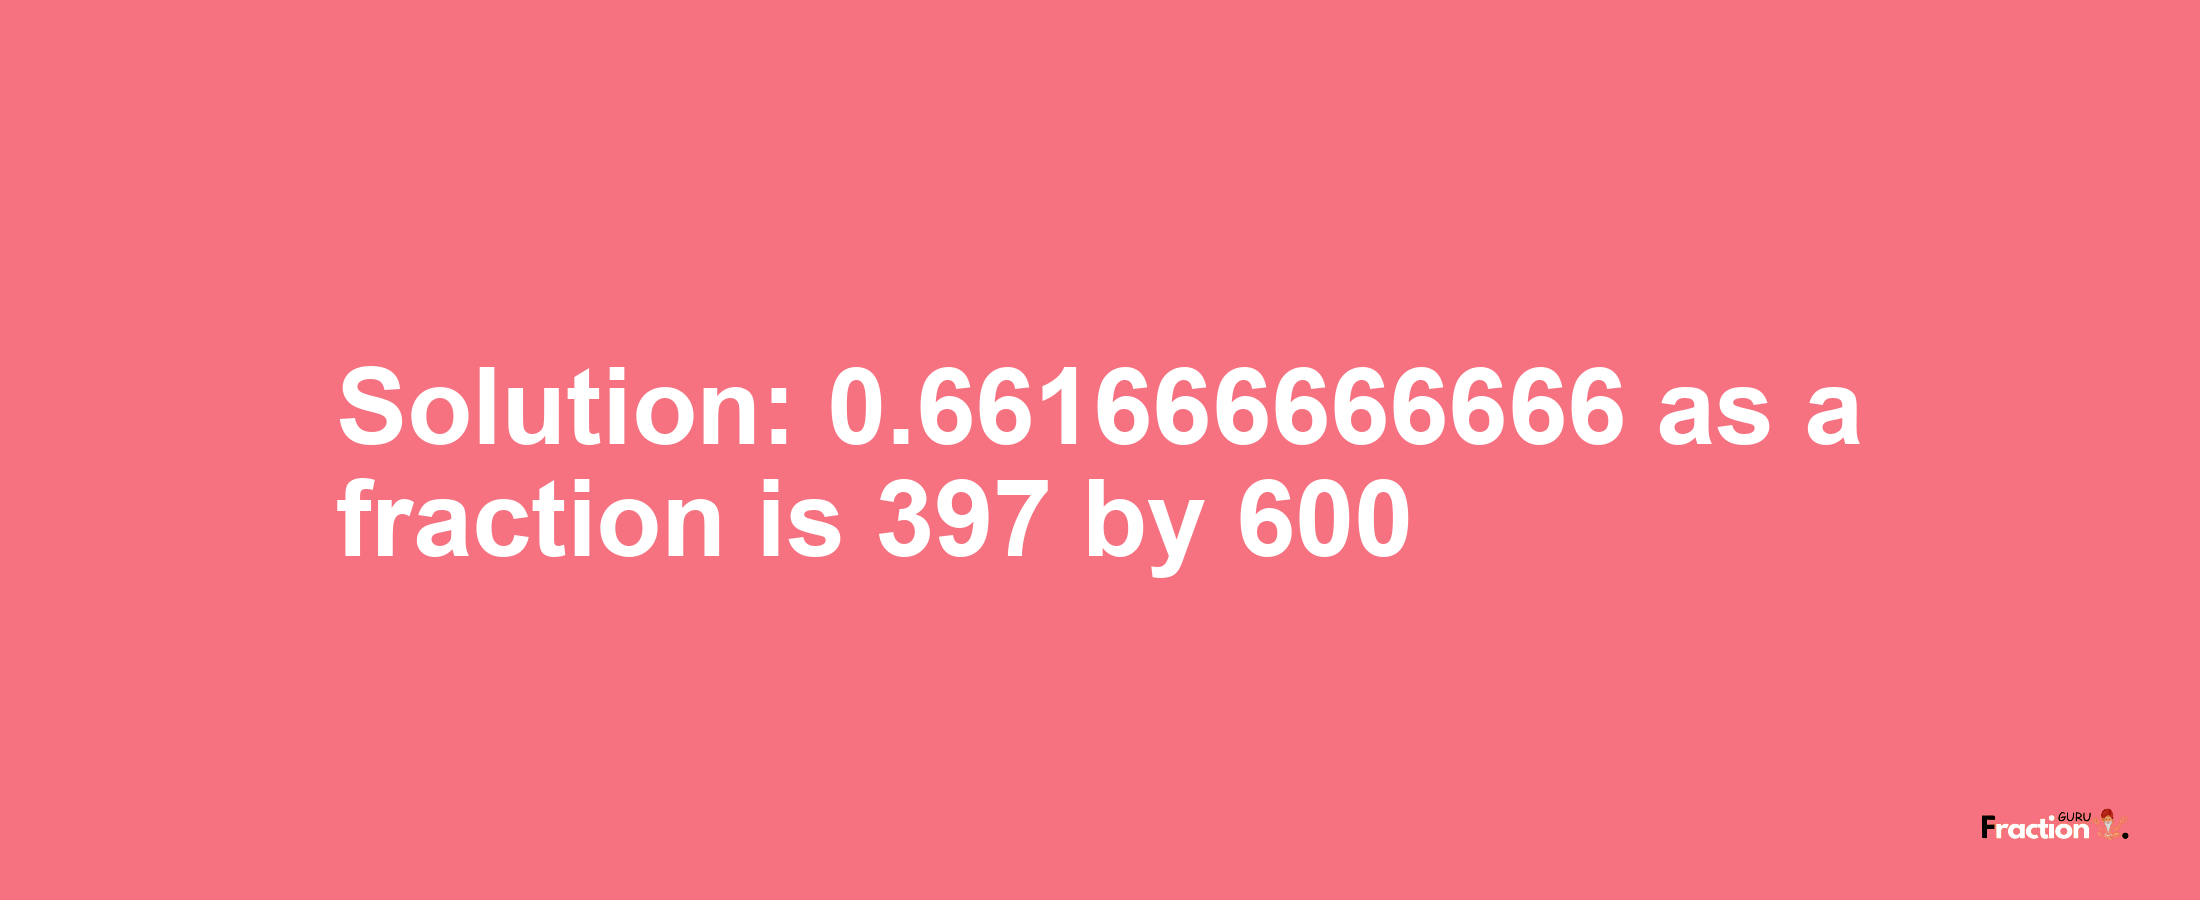 Solution:0.661666666666 as a fraction is 397/600